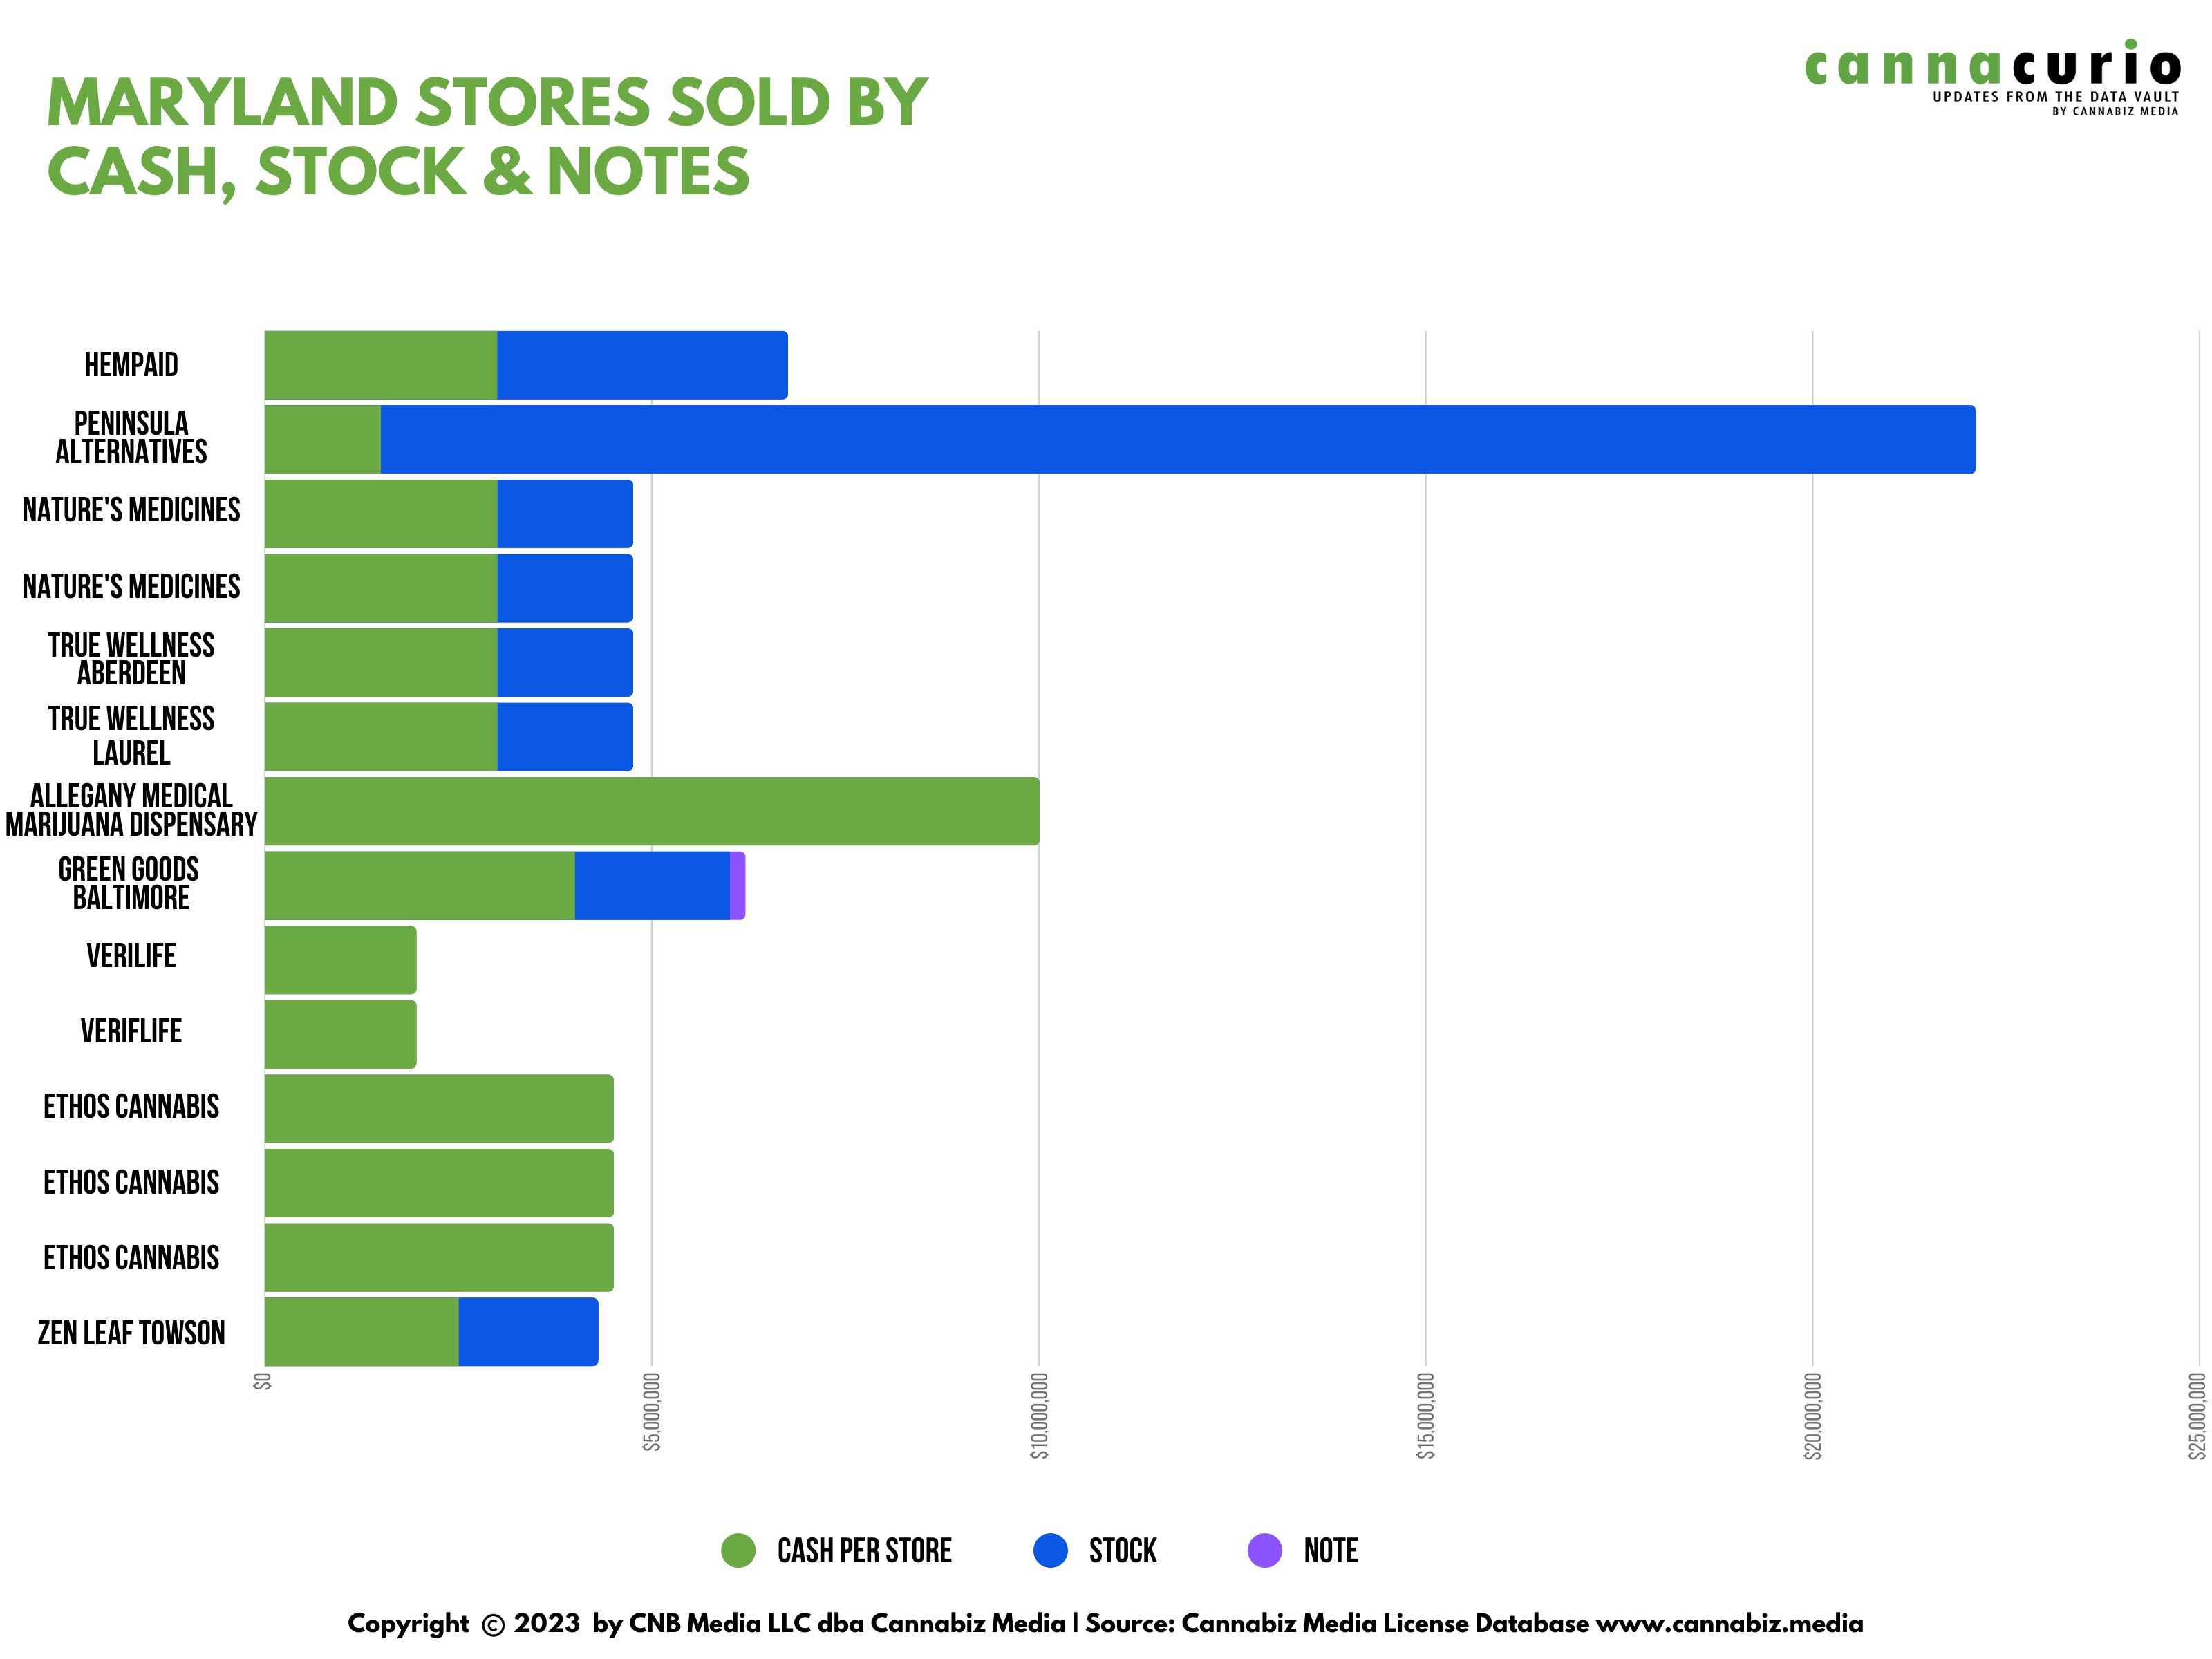 Graph of Maryland stores sold by cash, stock & notes